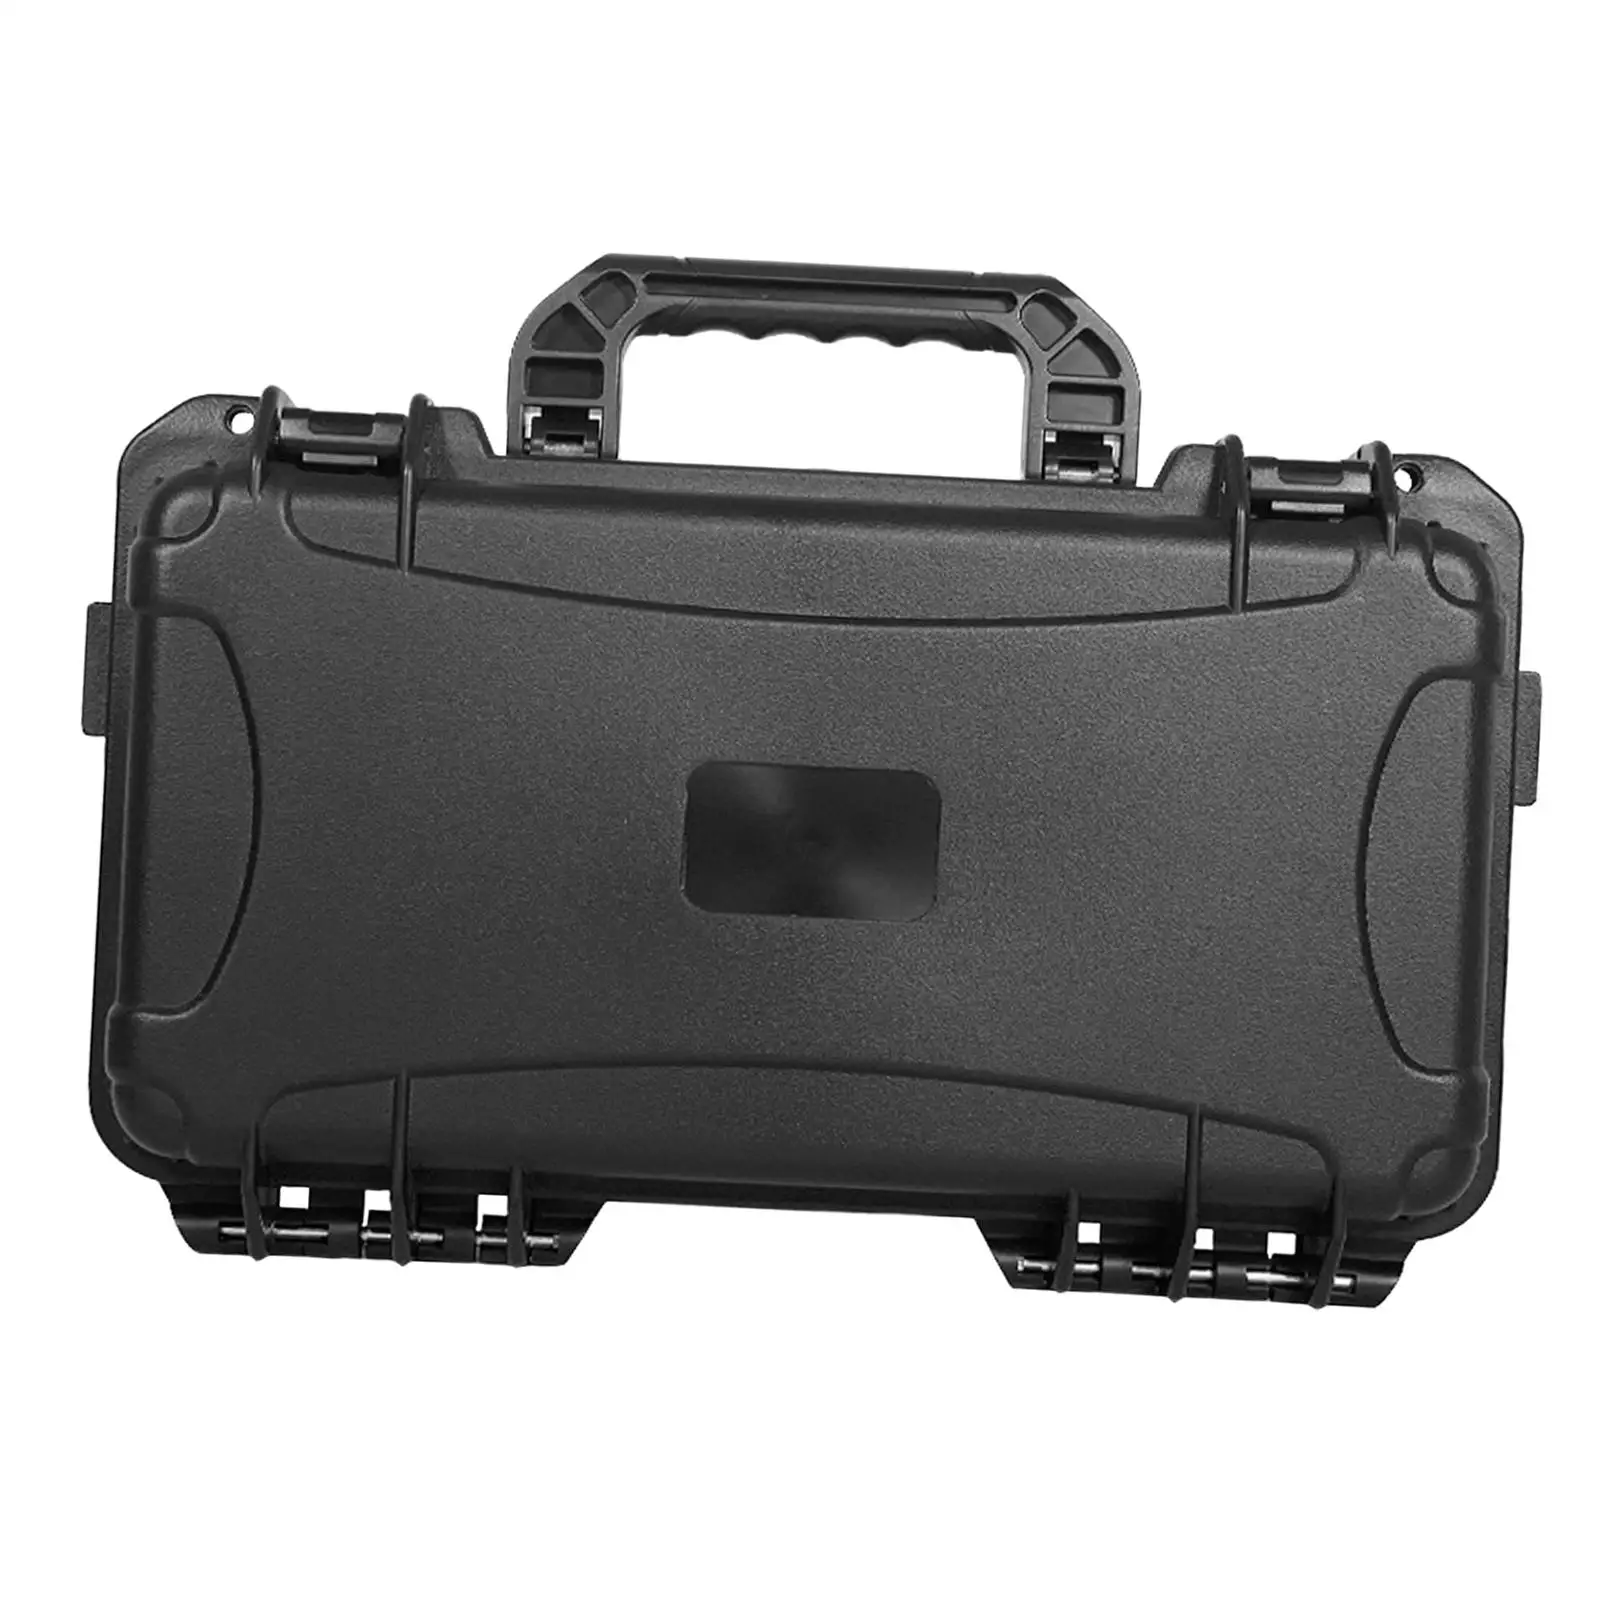 Shockproof Outdoor Storage Case carry tools Case Shatterproof Sealed Box for Photographic Equipment Transportation Home